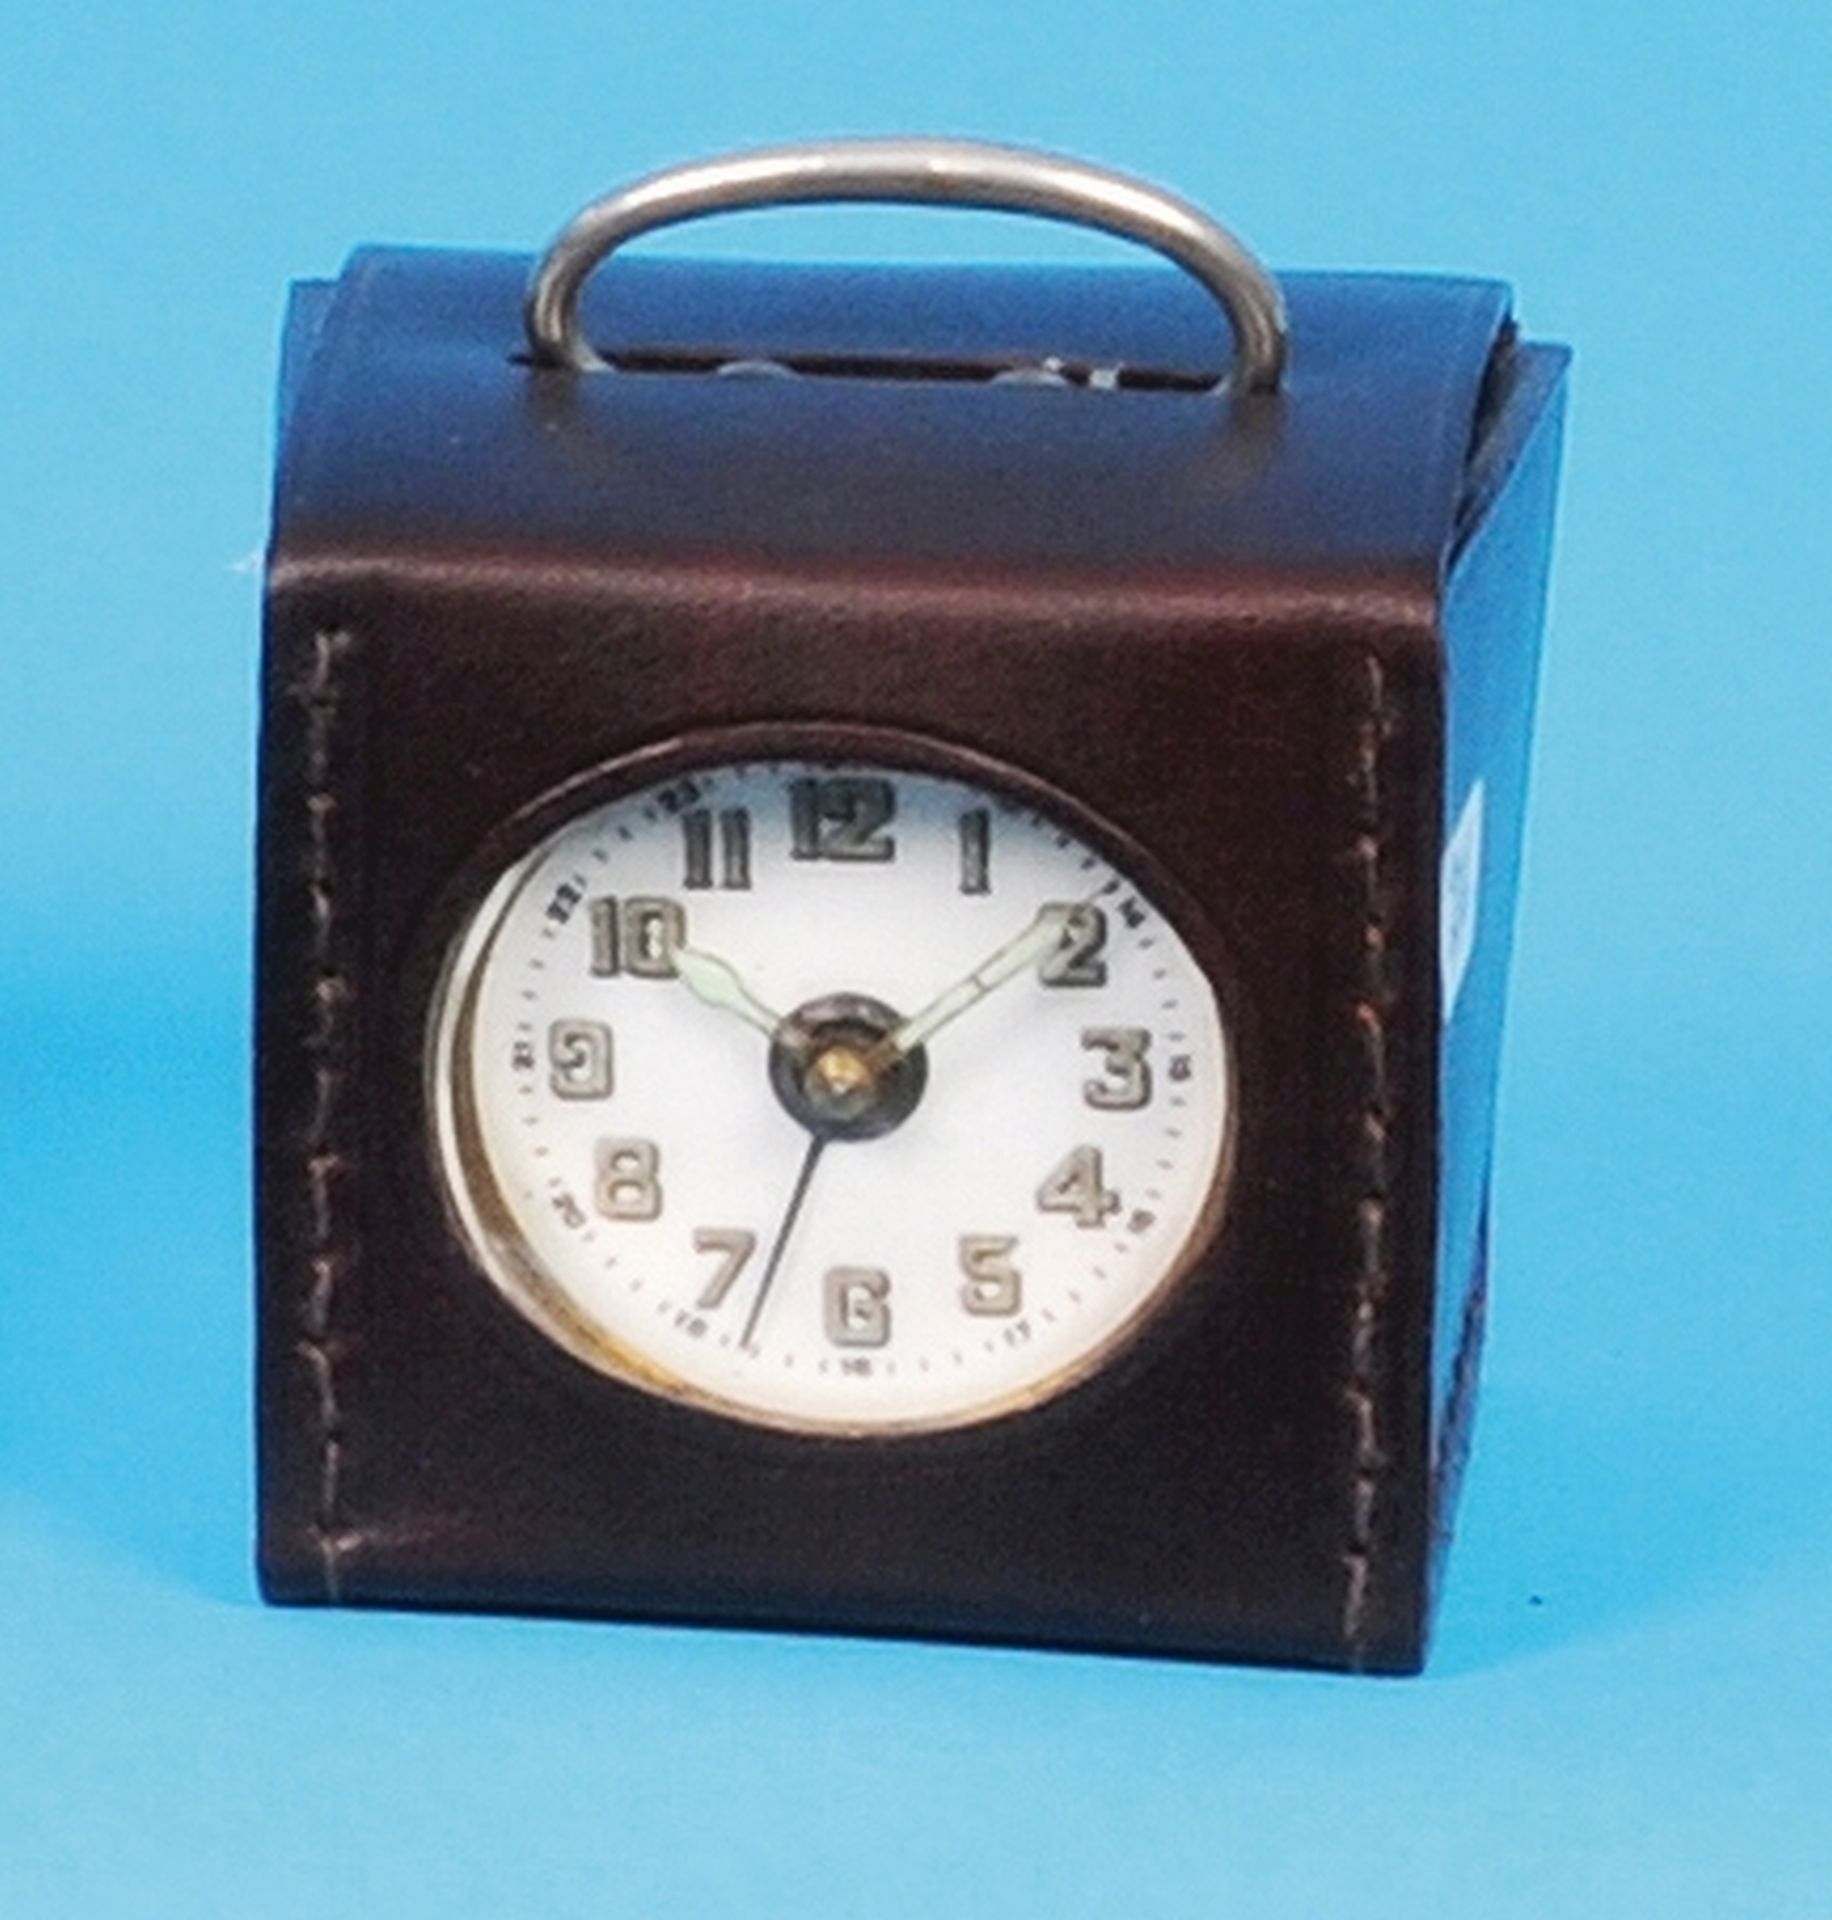 Small square alarm clock in original case, carrying bracket serves also for setting off alarm clocks